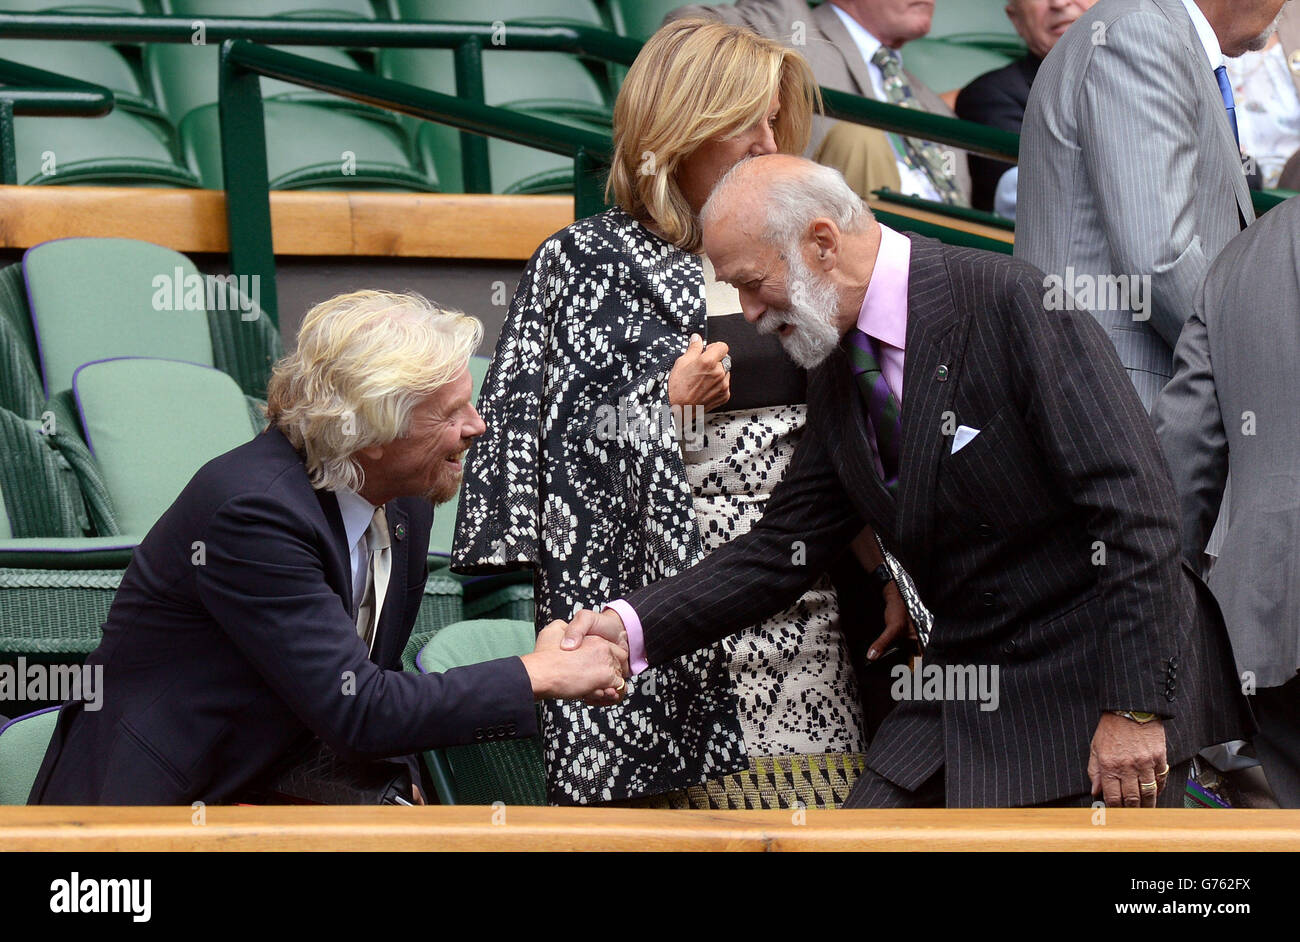 richard-branson-shakes-hands-with-prince-michael-of-kent-right-in-G762FX.jpg